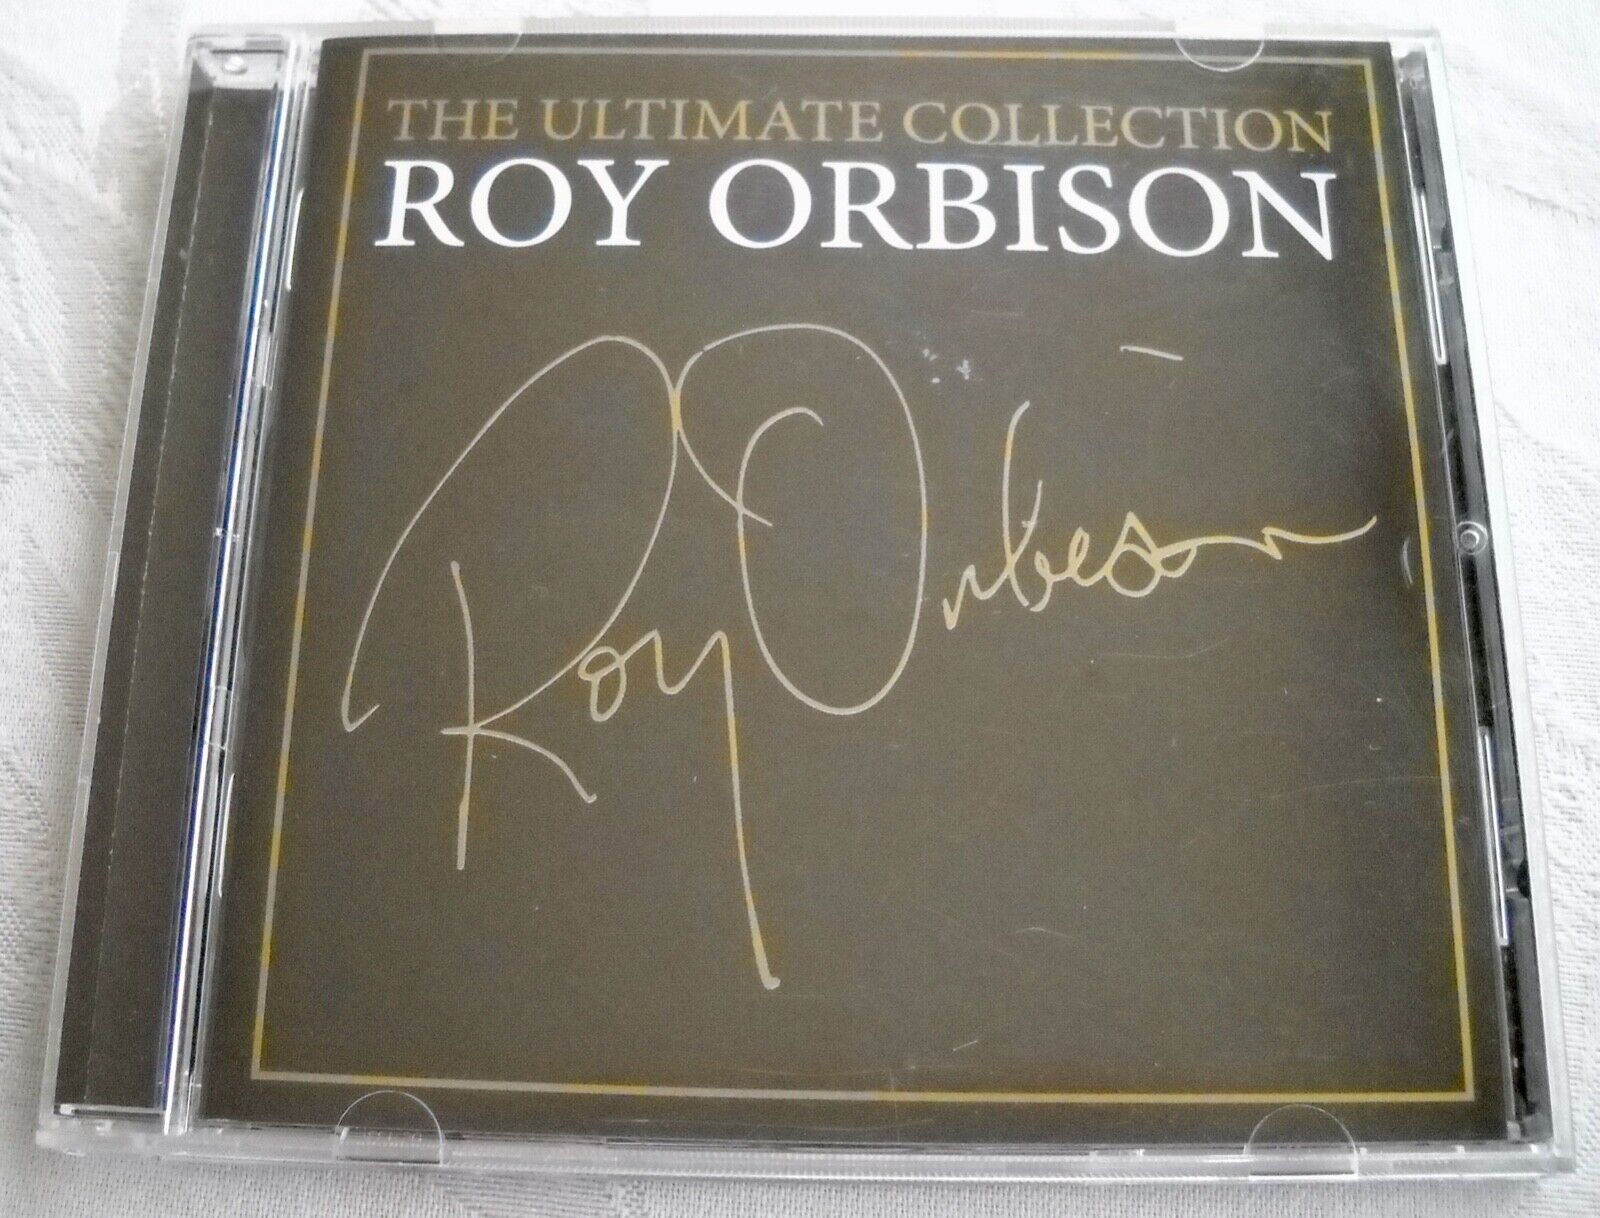 The Ultimate Collection by Roy Orbison (CD, 2016)